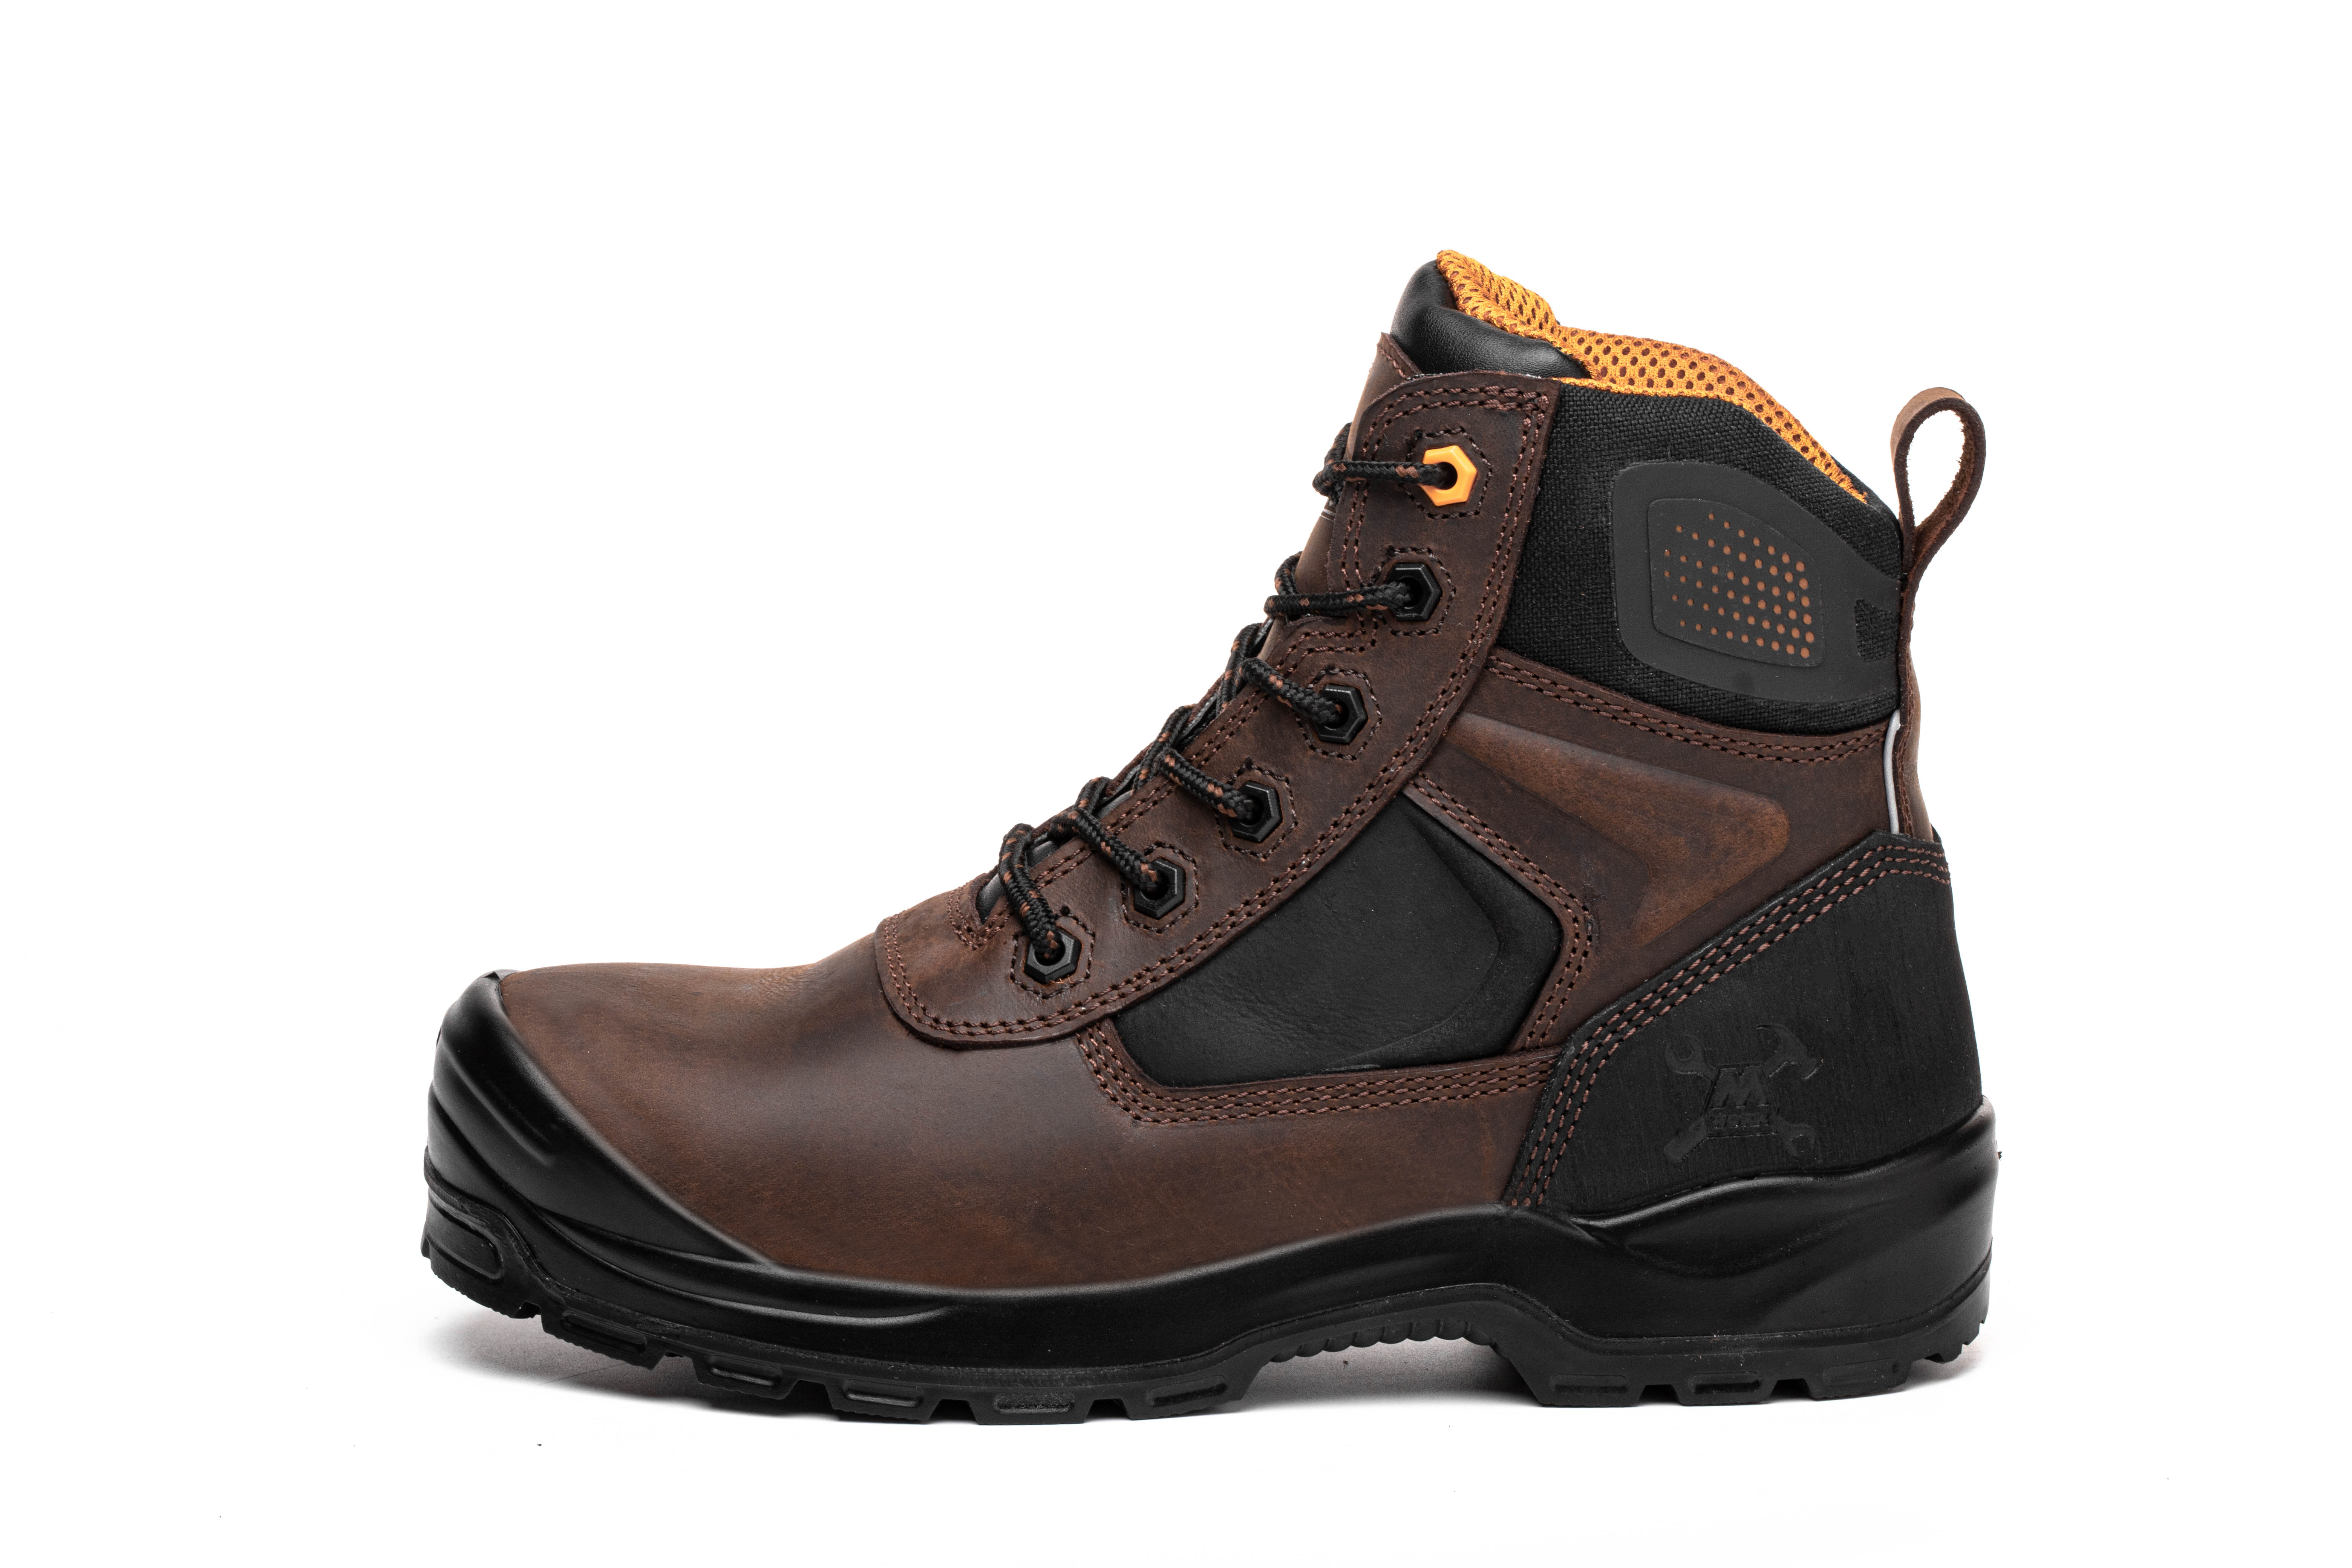  6 IN. Brown Thor  Composite toe&Plate Water Resistant No Metal Work Boot